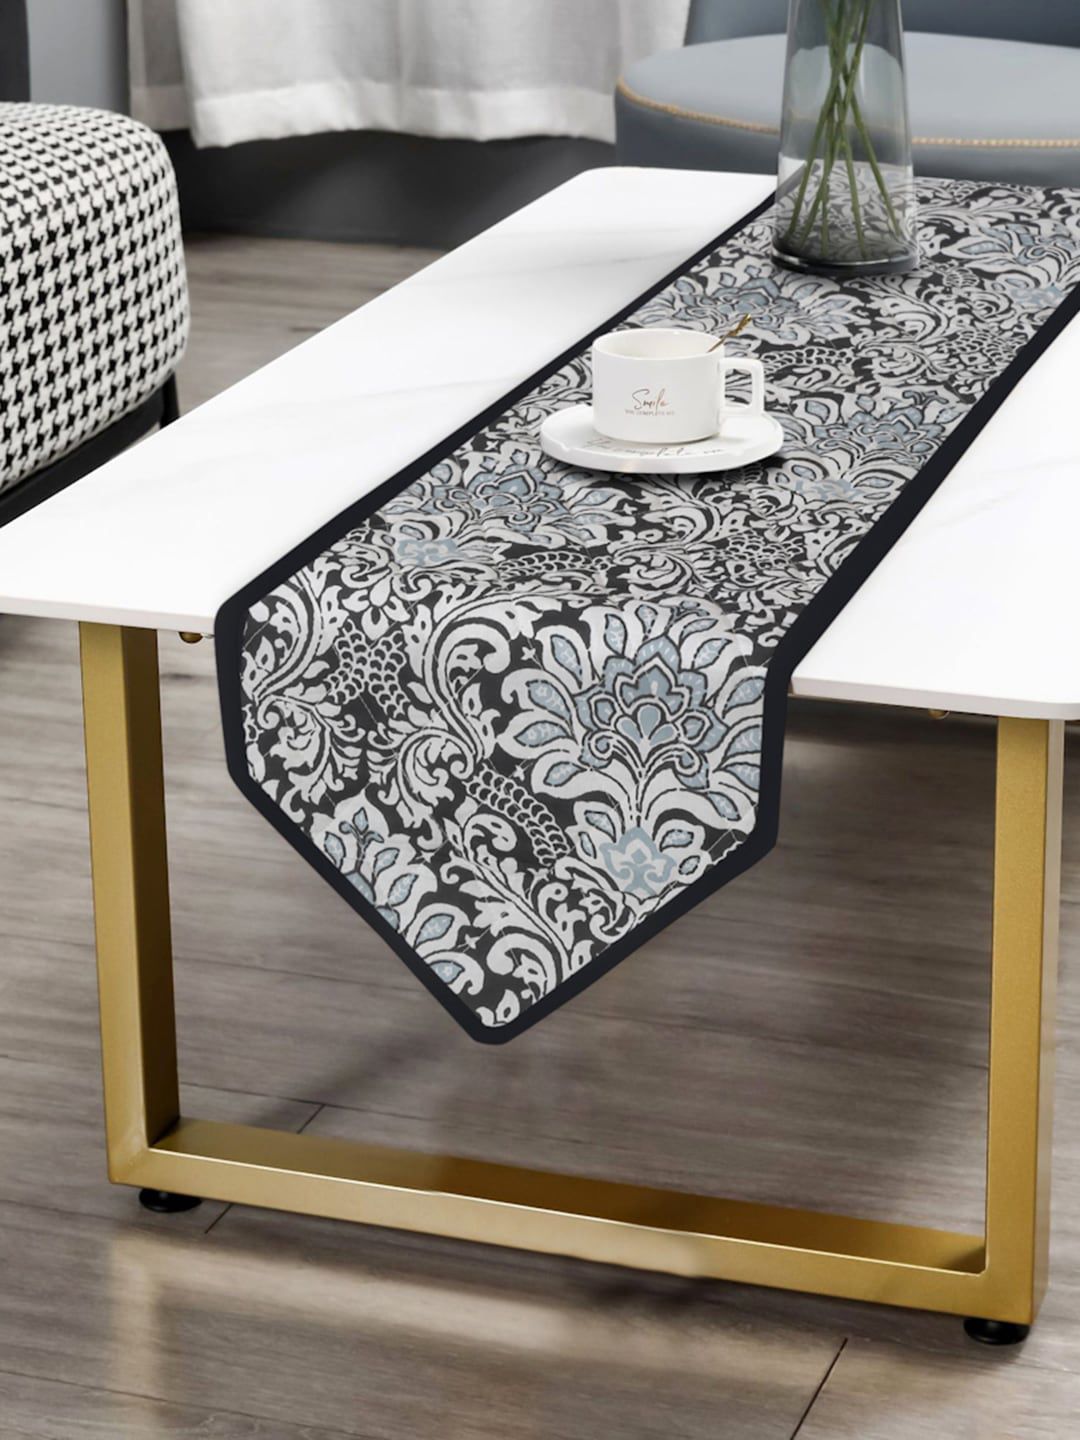 Rajasthan Decor Black & White Printed Pure Cotton Table Runners Price in India